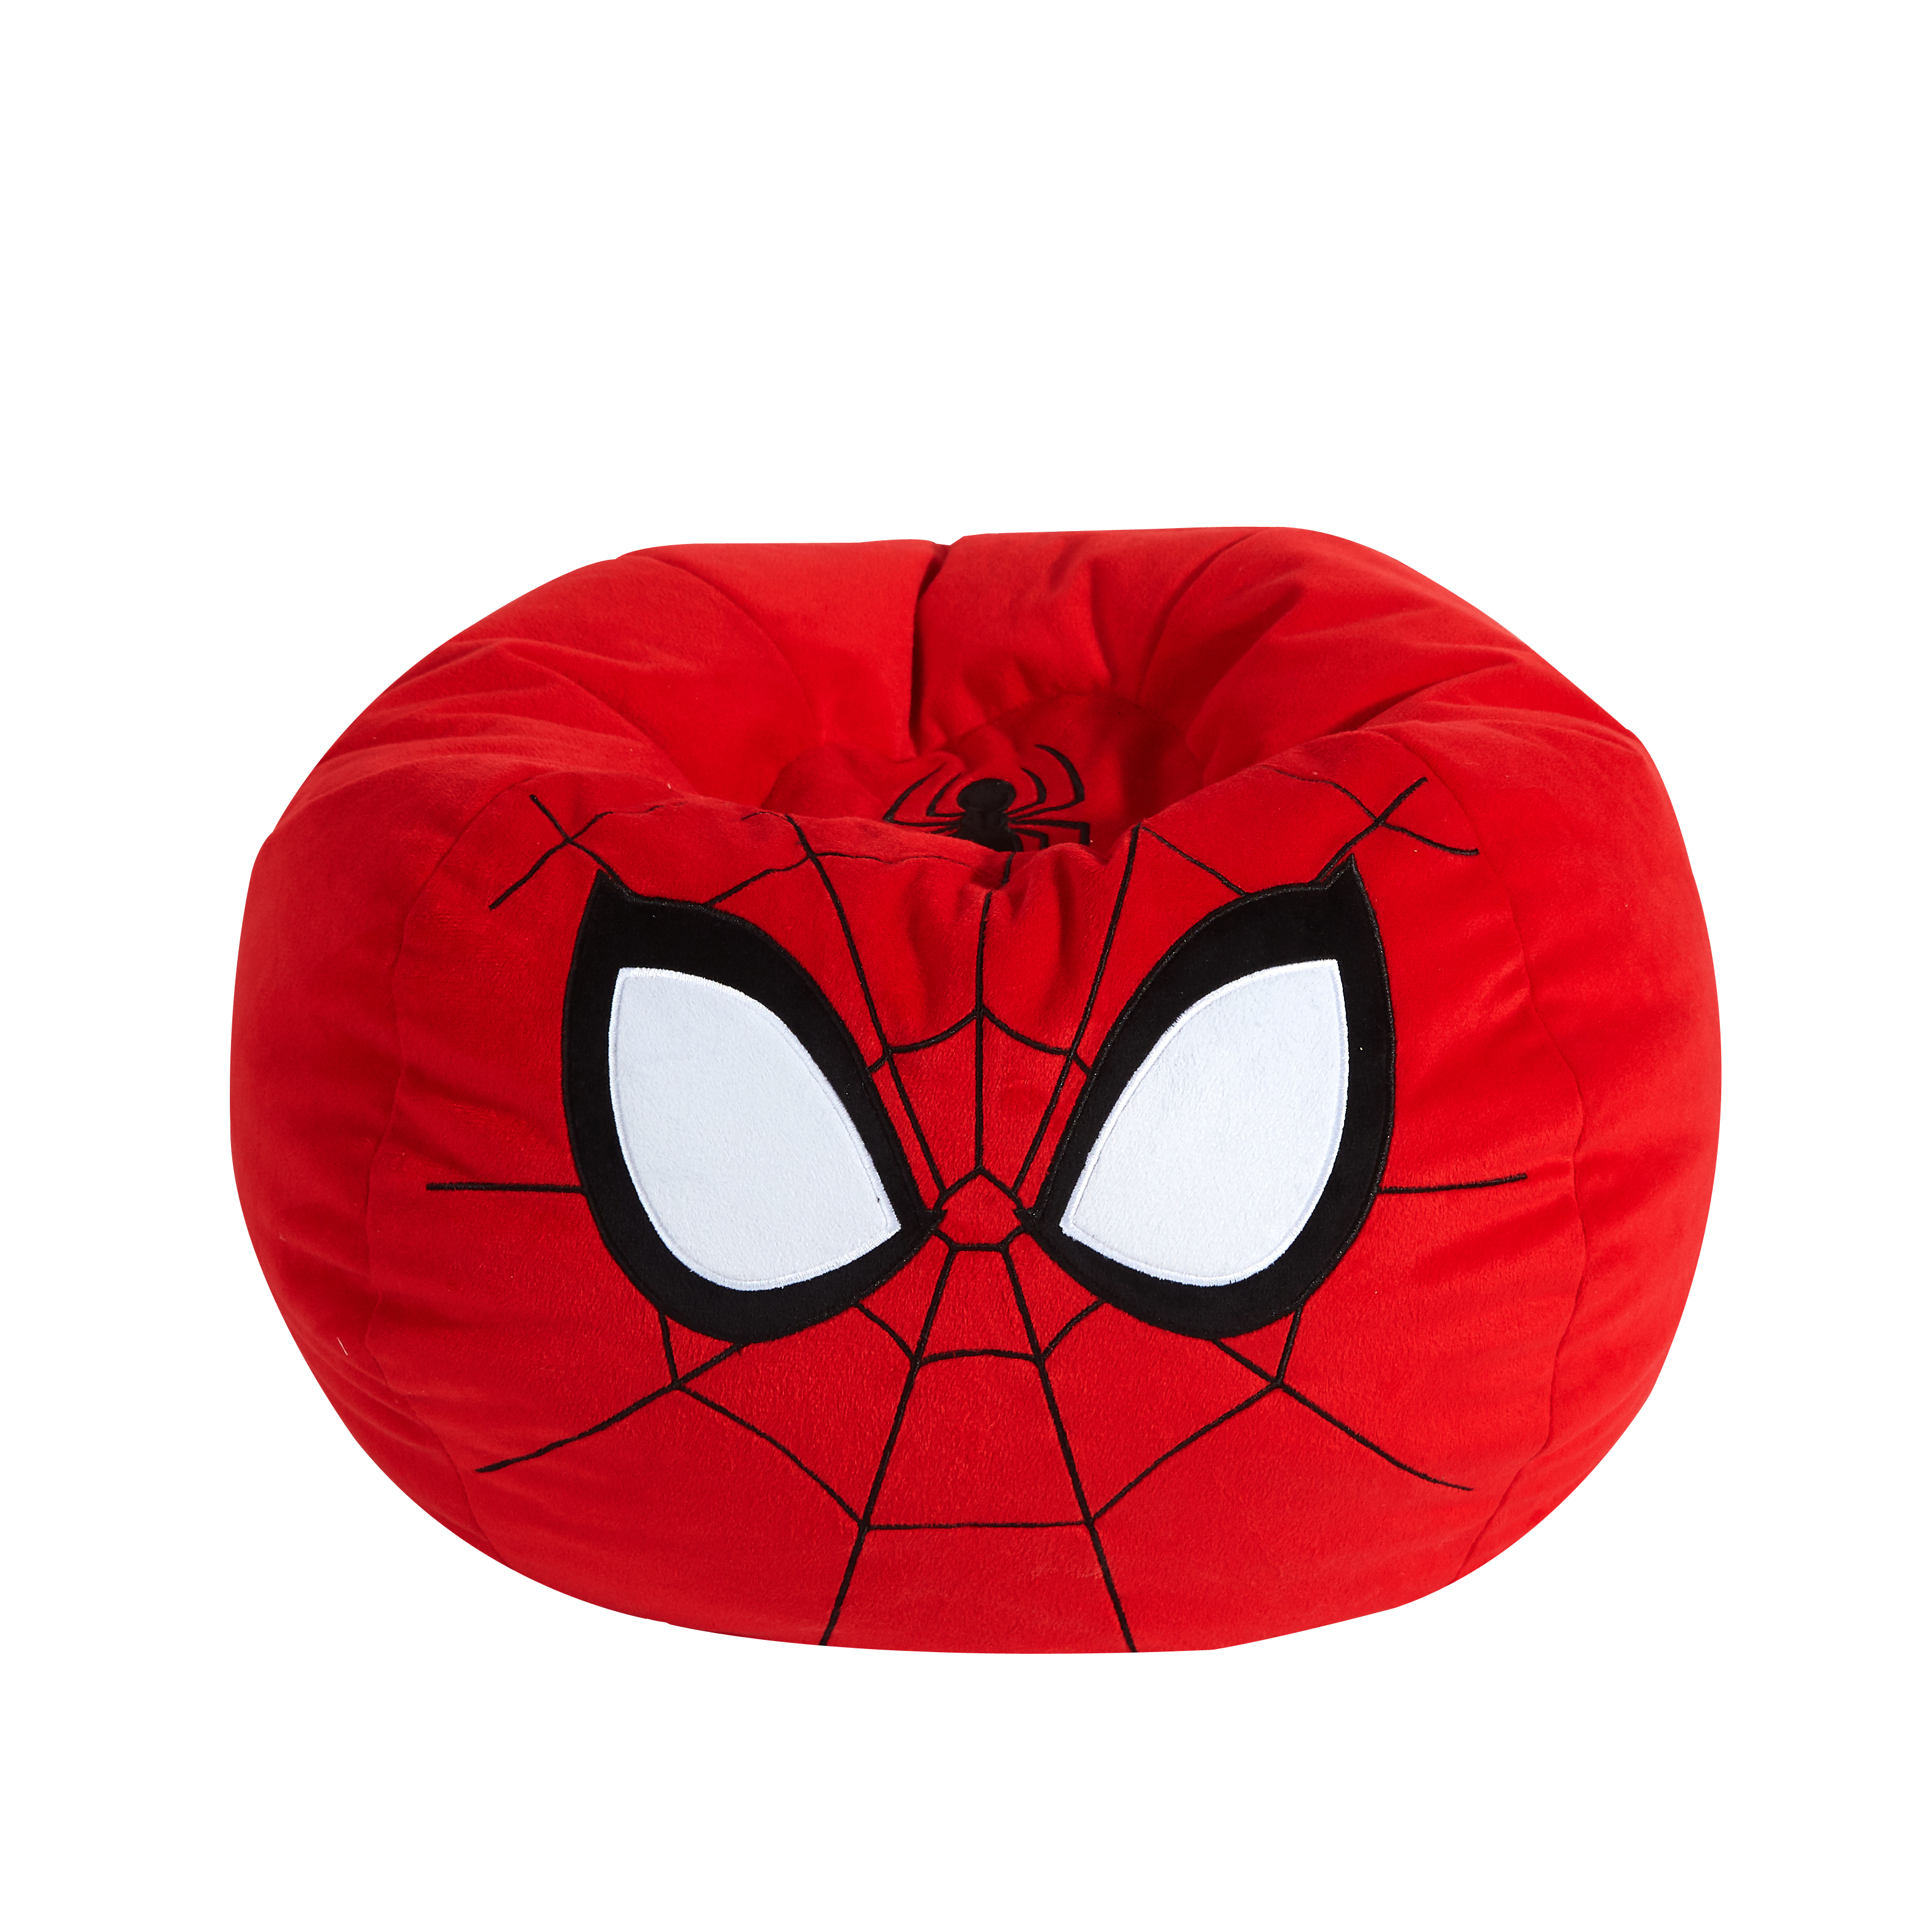 Marvel Spider-Man Bean Bag Chair, Red - image 2 of 3